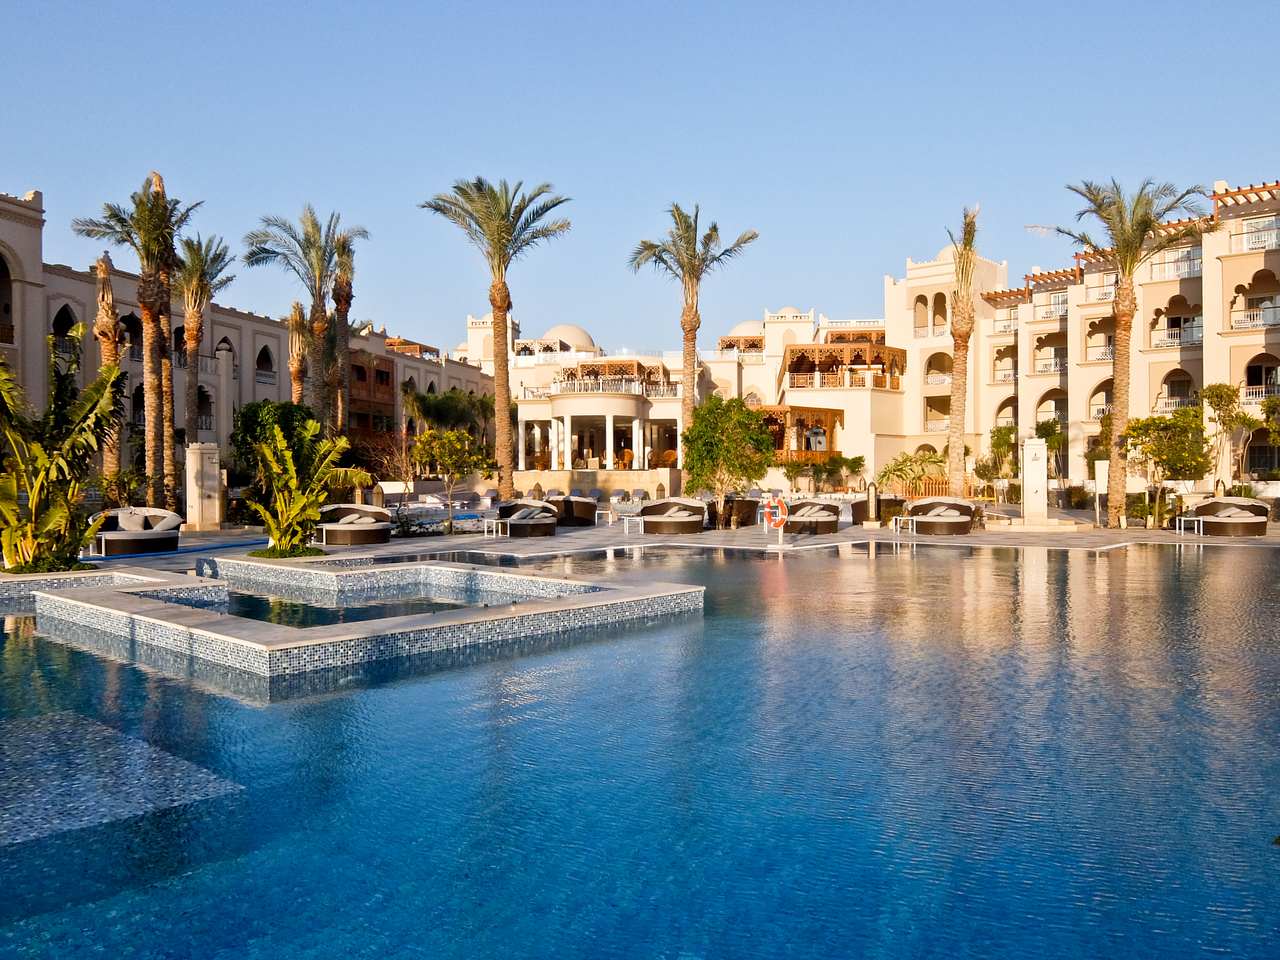 Hotel Review: Grand Palace, Hurghada, Egypt